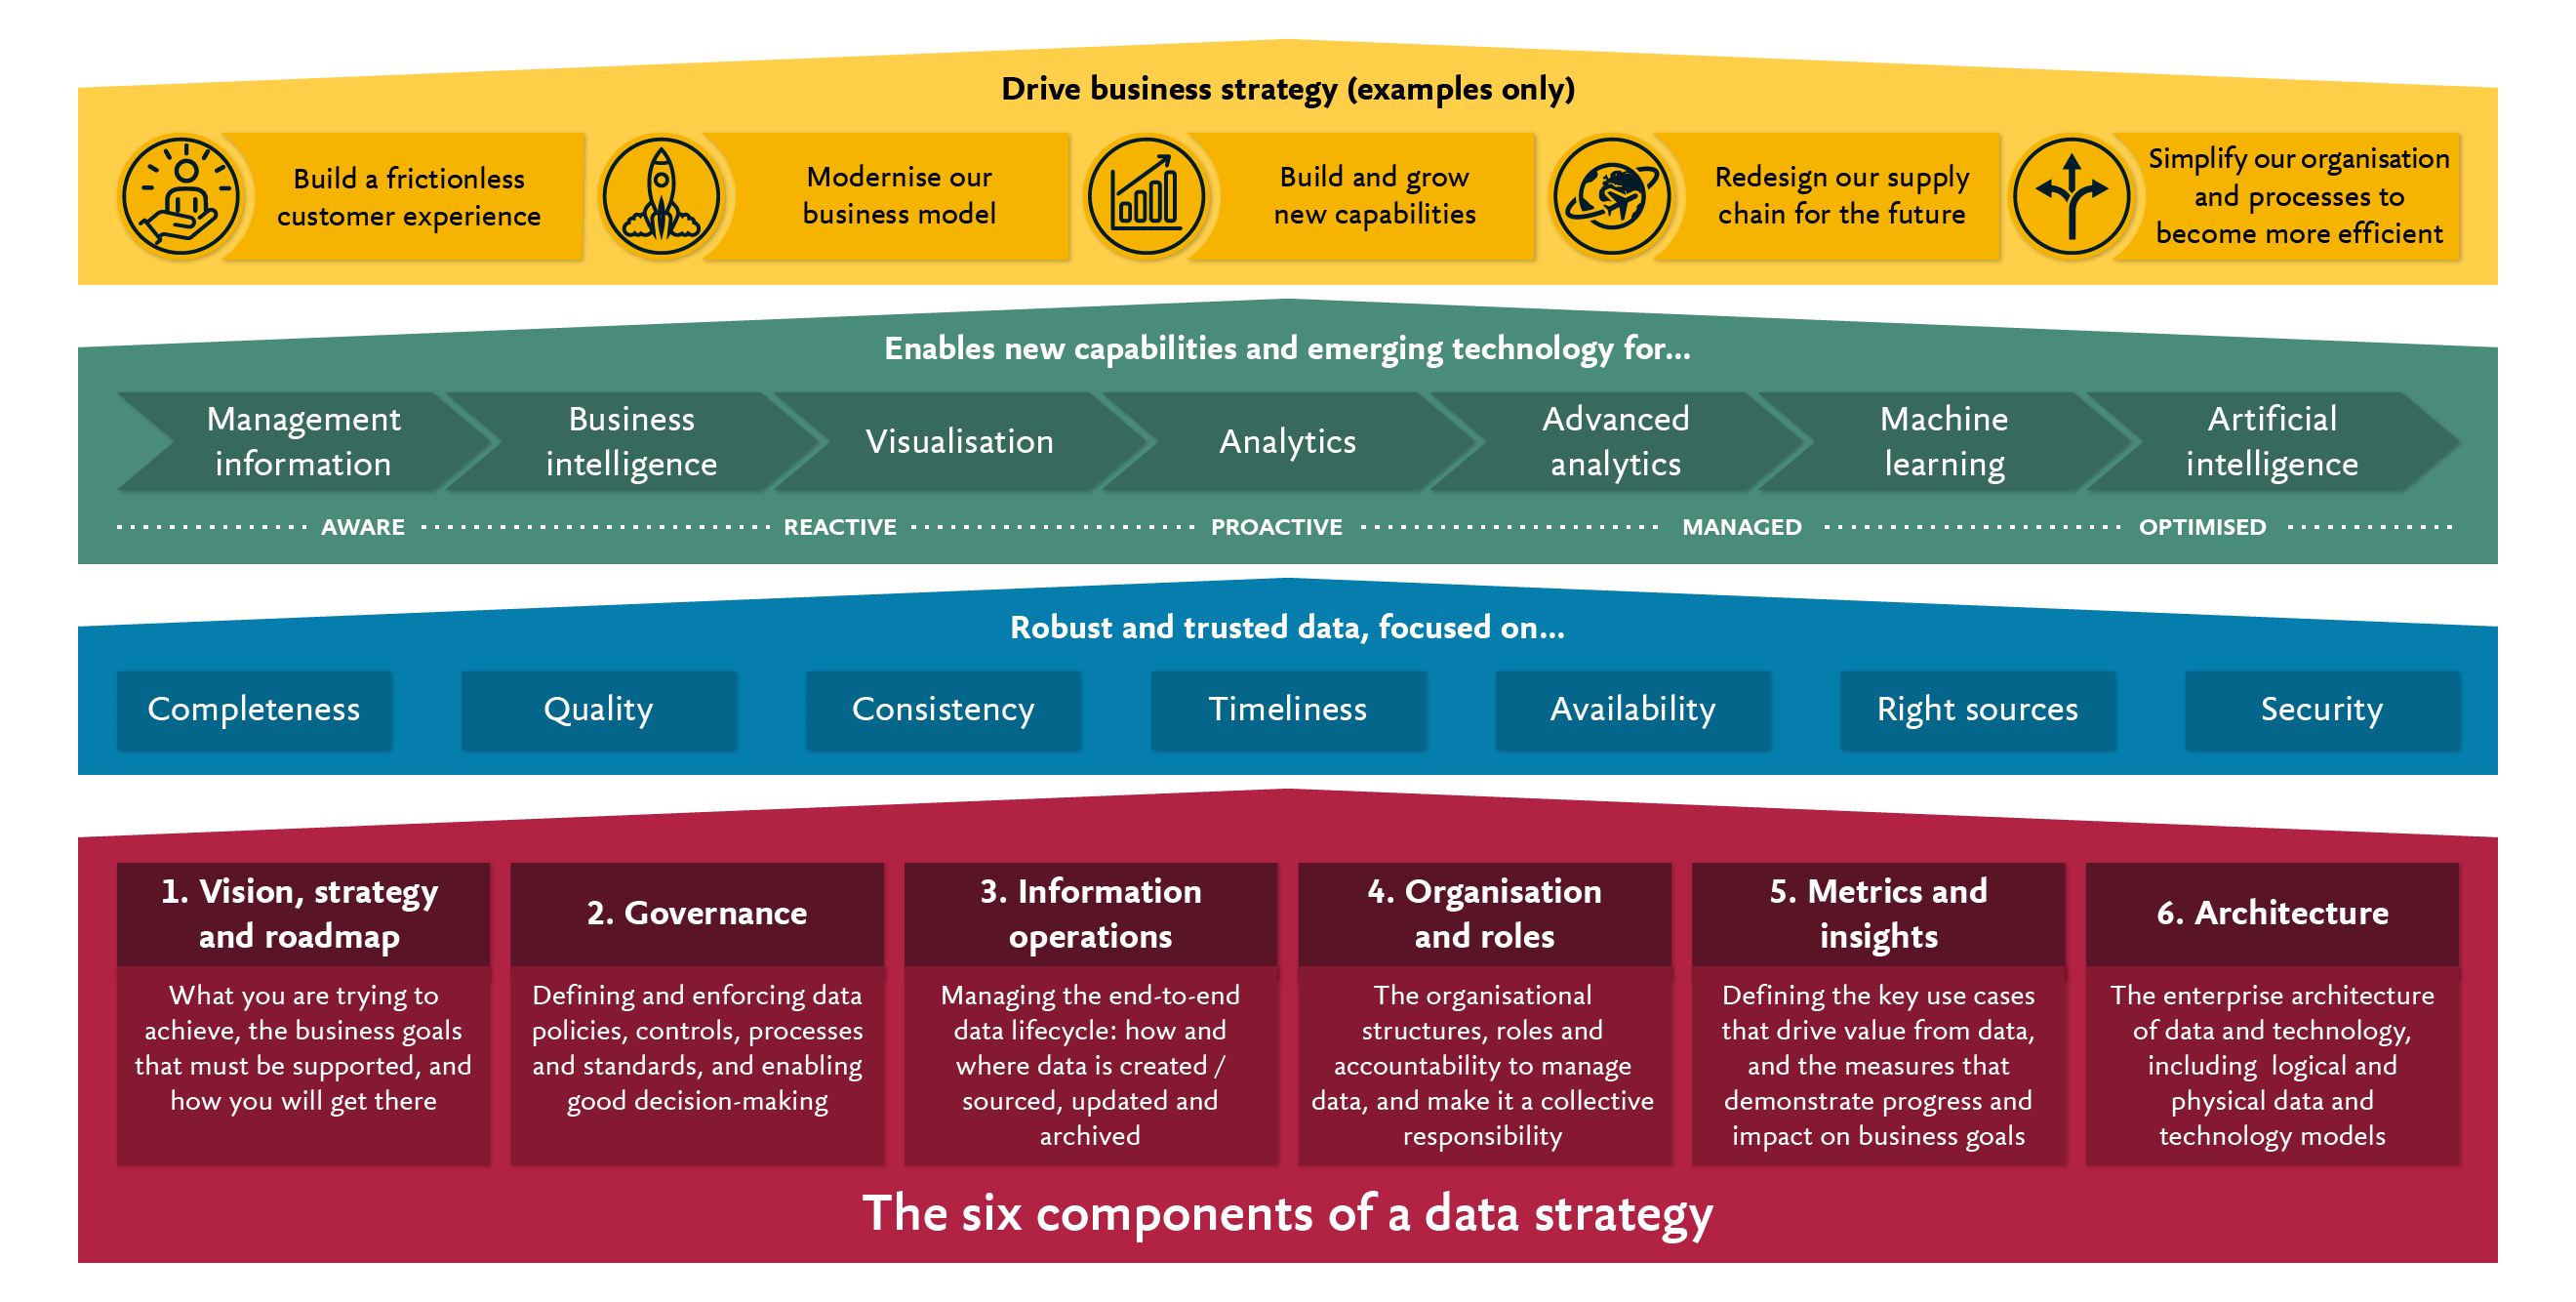 UK-The-six-components-of-a-data-strategy@2x.png